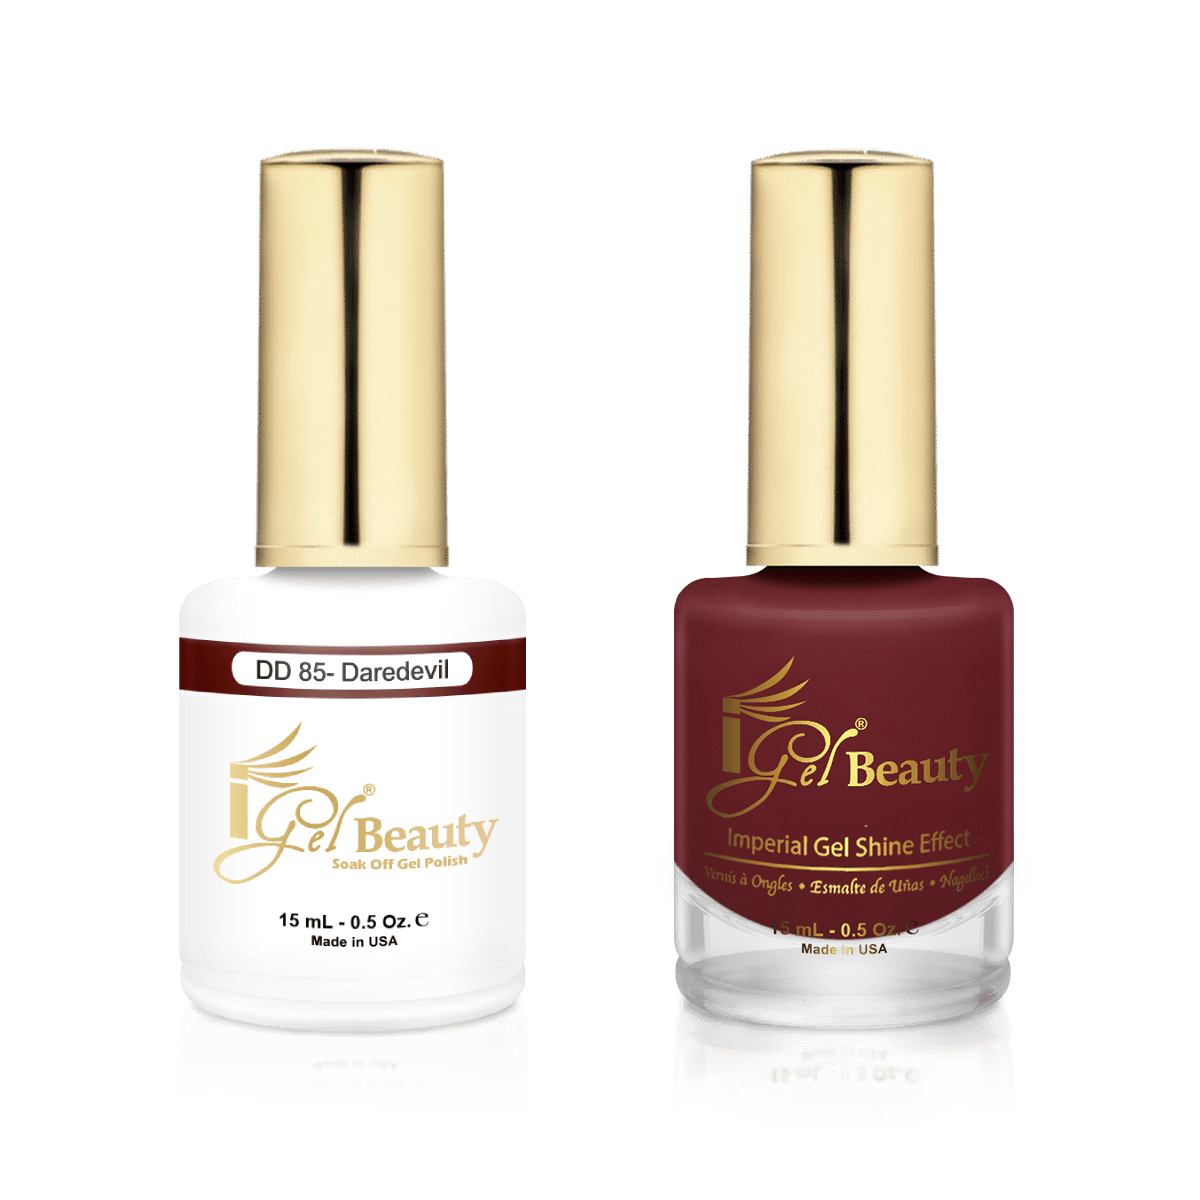 IGel Duo Gel Polish + Matching Nail Lacquer DD 85 DAREDEVIL